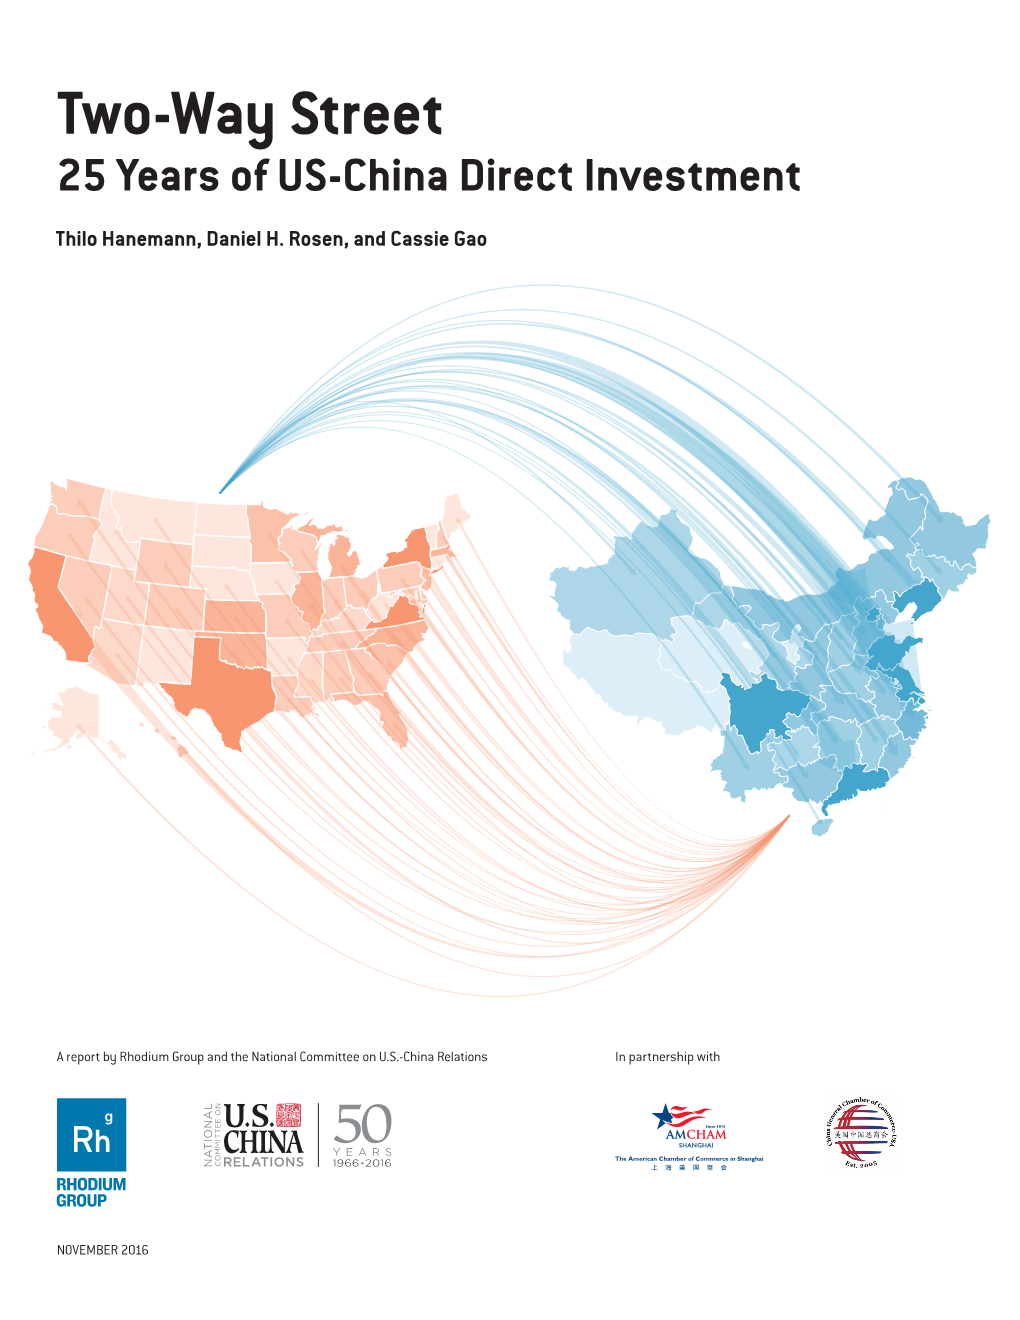 Two-Way Street 25 Years of US-China Direct Investment